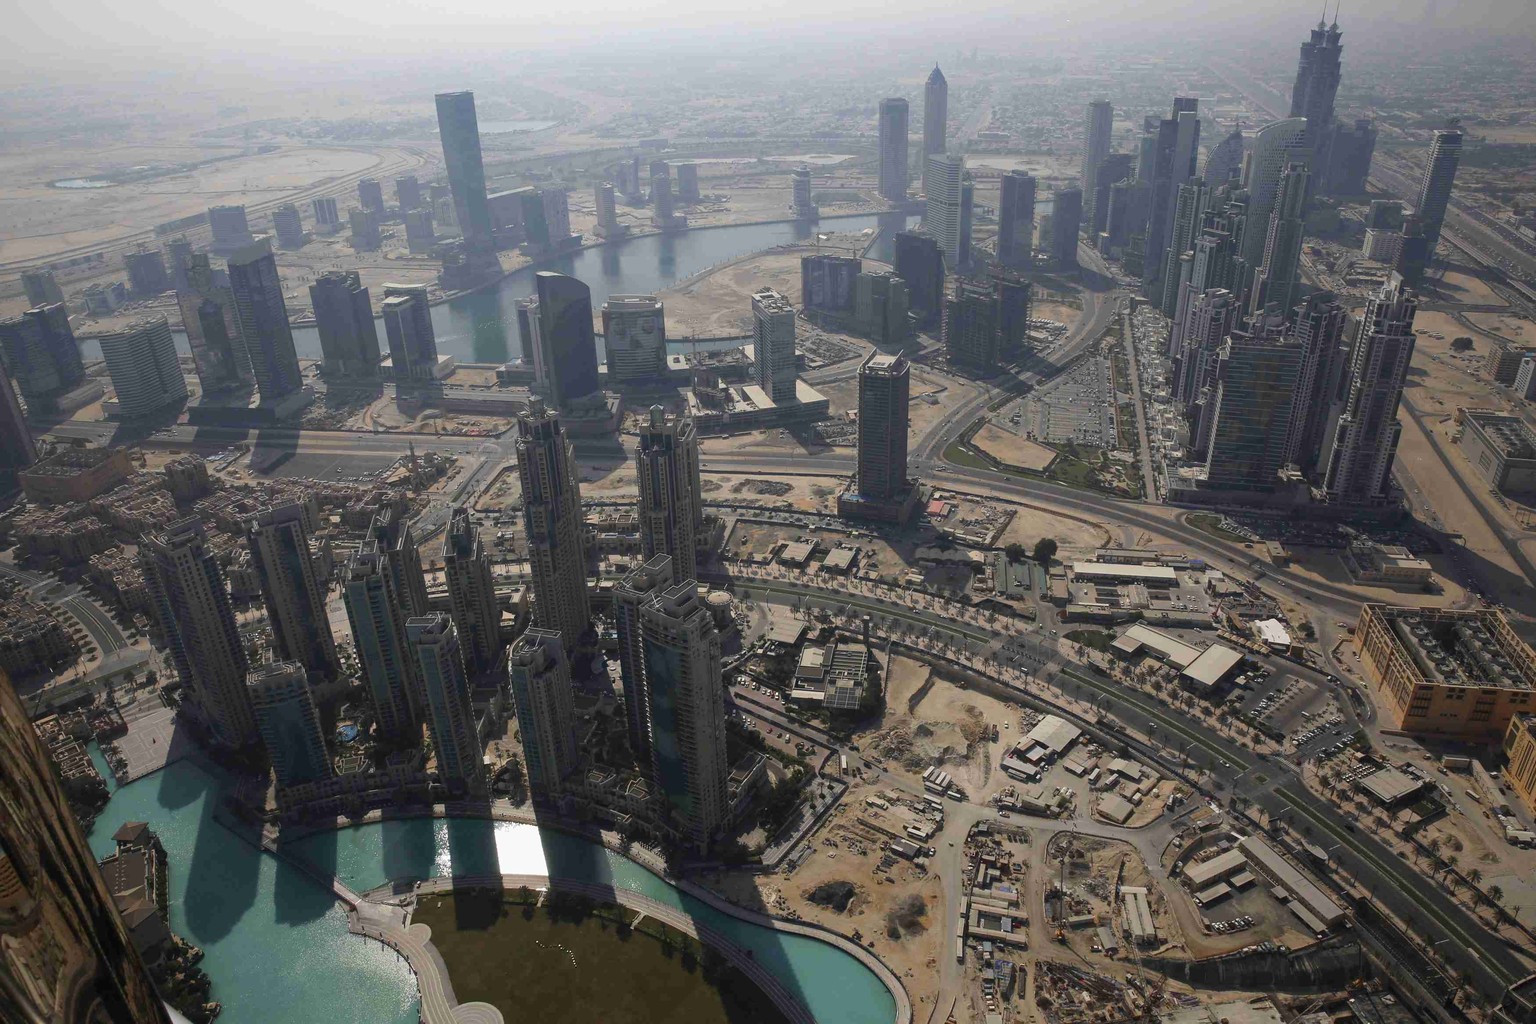 An aerial view of Dubai from Burj Khalifa, the tallest building in the world, November 19, 2014. REUTERS/Ahmed Jadallah (UNITED ARAB EMIRATES - Tags: BUSINESS SOCIETY CITYSCAPE)